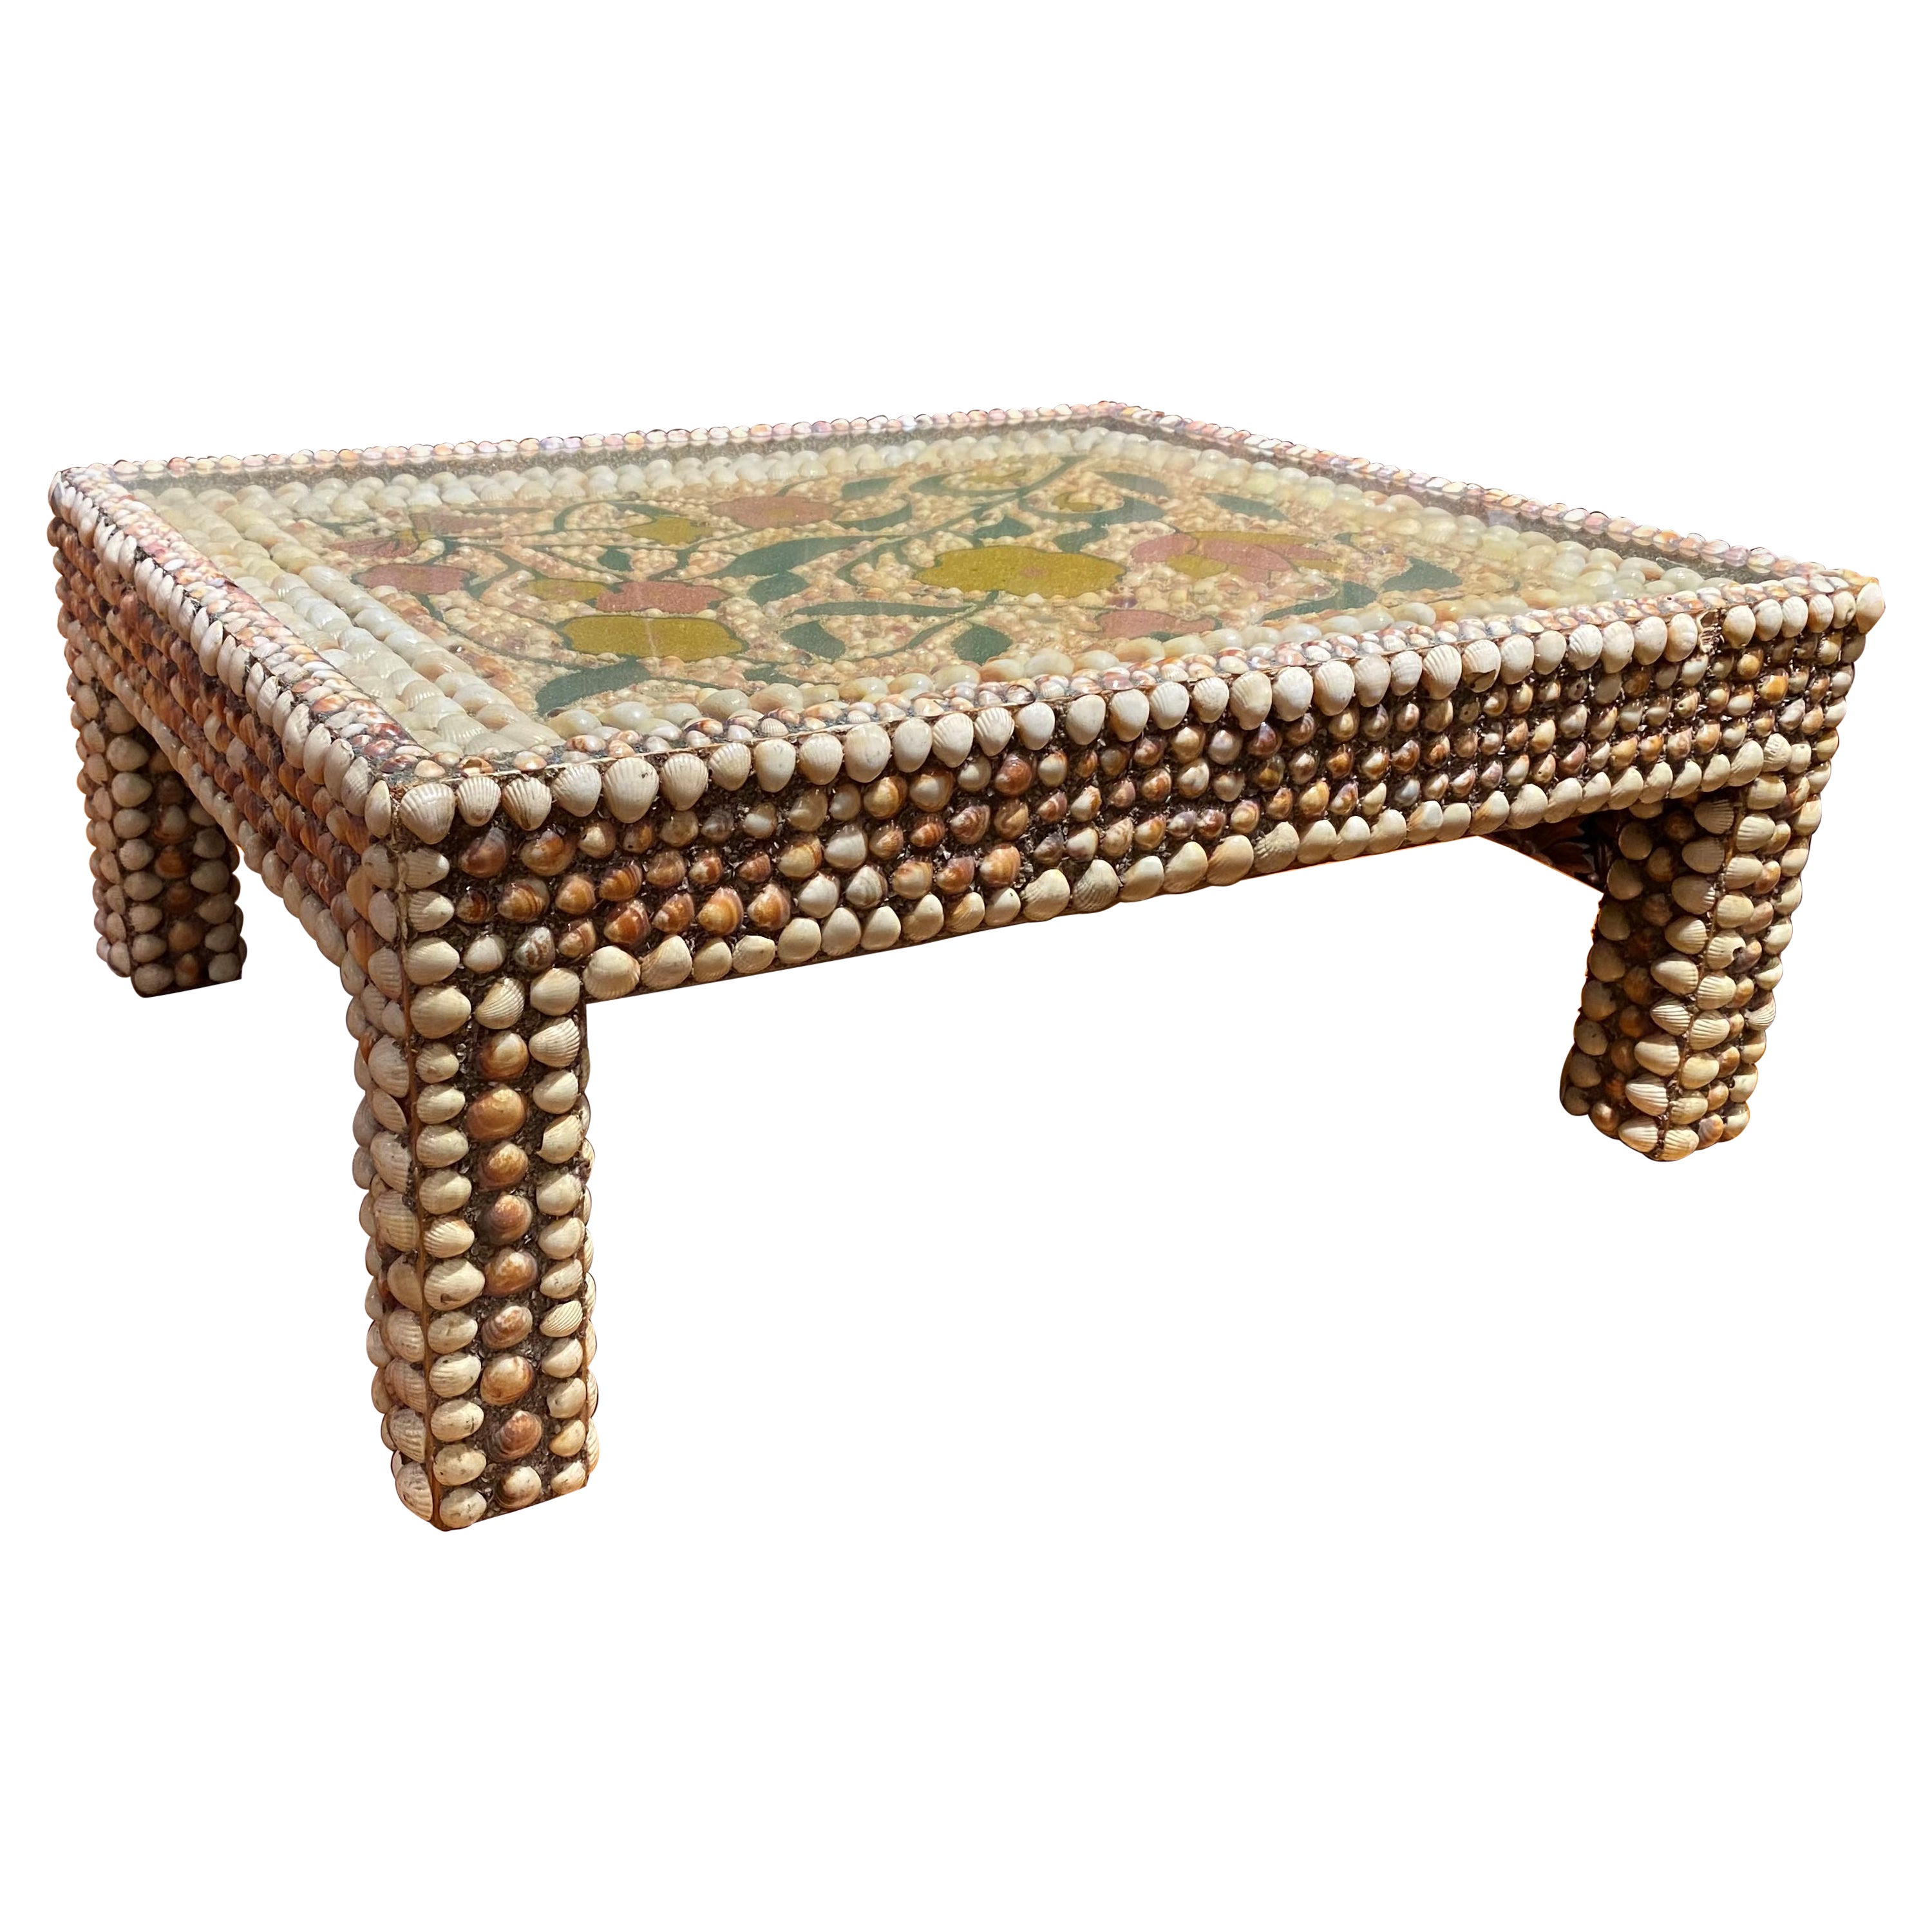 Early 20th Century French Folk Art Shellwork Table For Sale